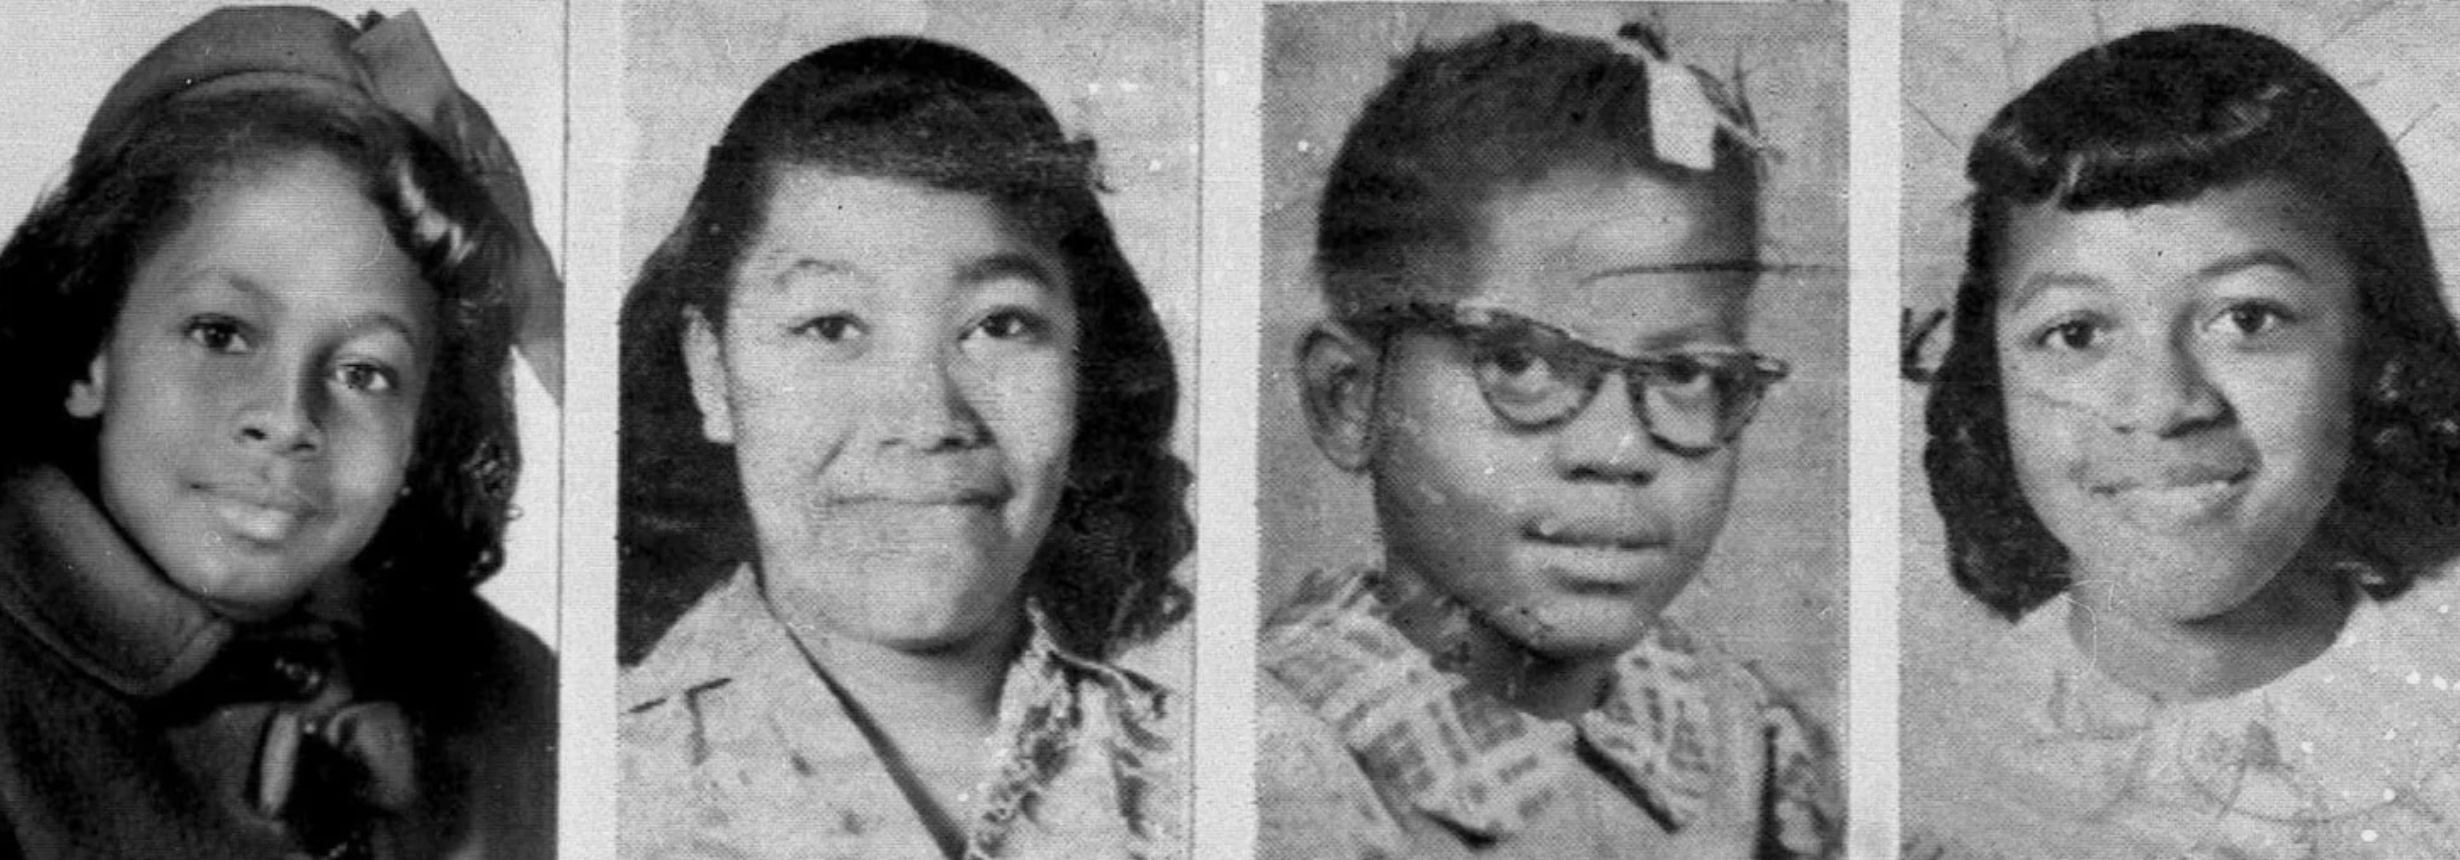 Bomb victims Denise McNair, Carole Robertson, Addie Mae Collins and Cynthia Wesley